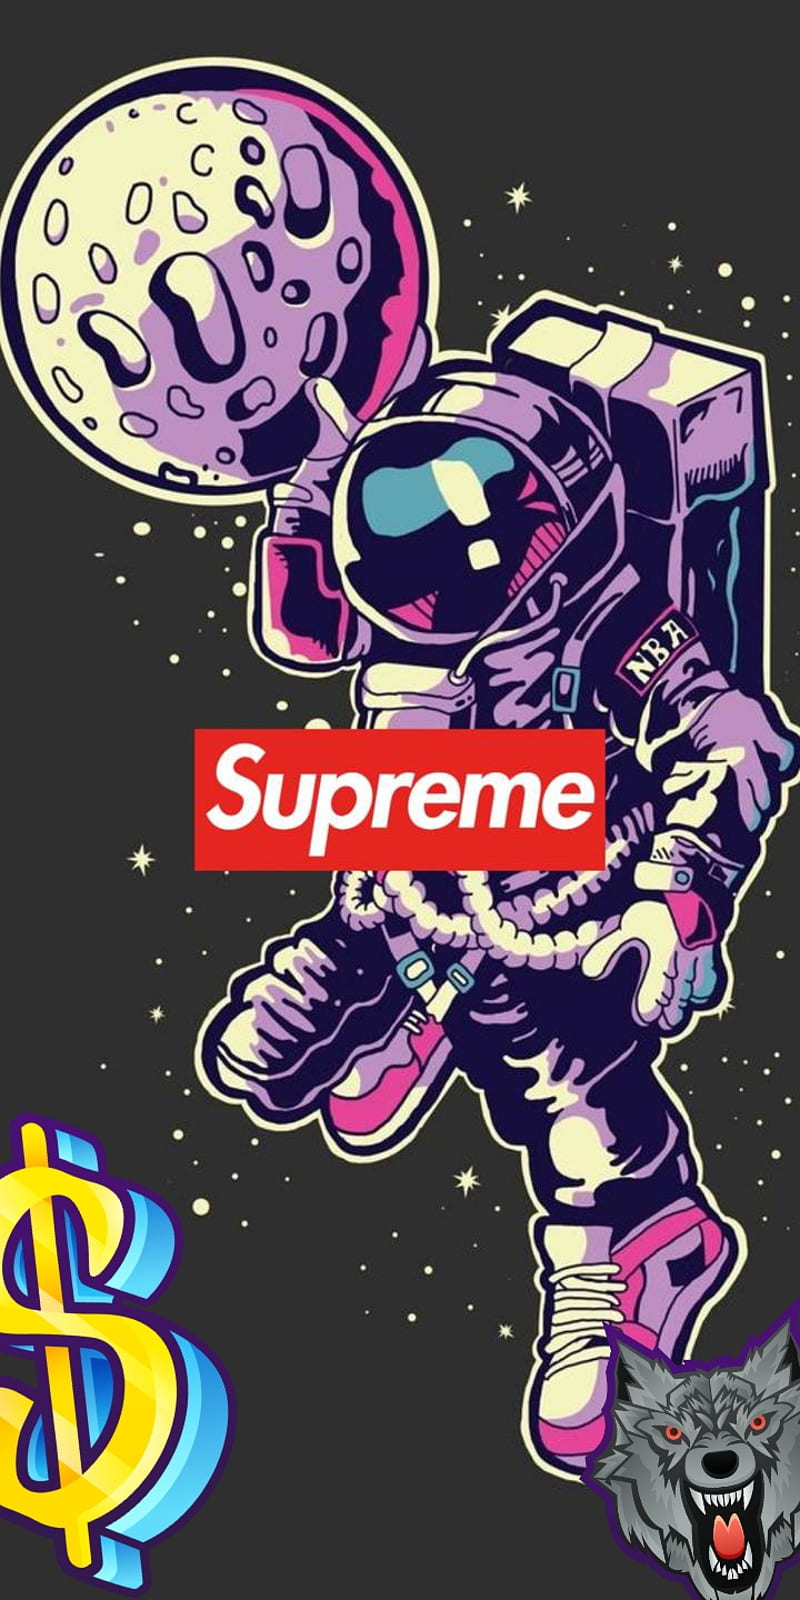 1080x1920 Supreme Wallpapers for IPhone 6S /7 /8 [Retina HD]